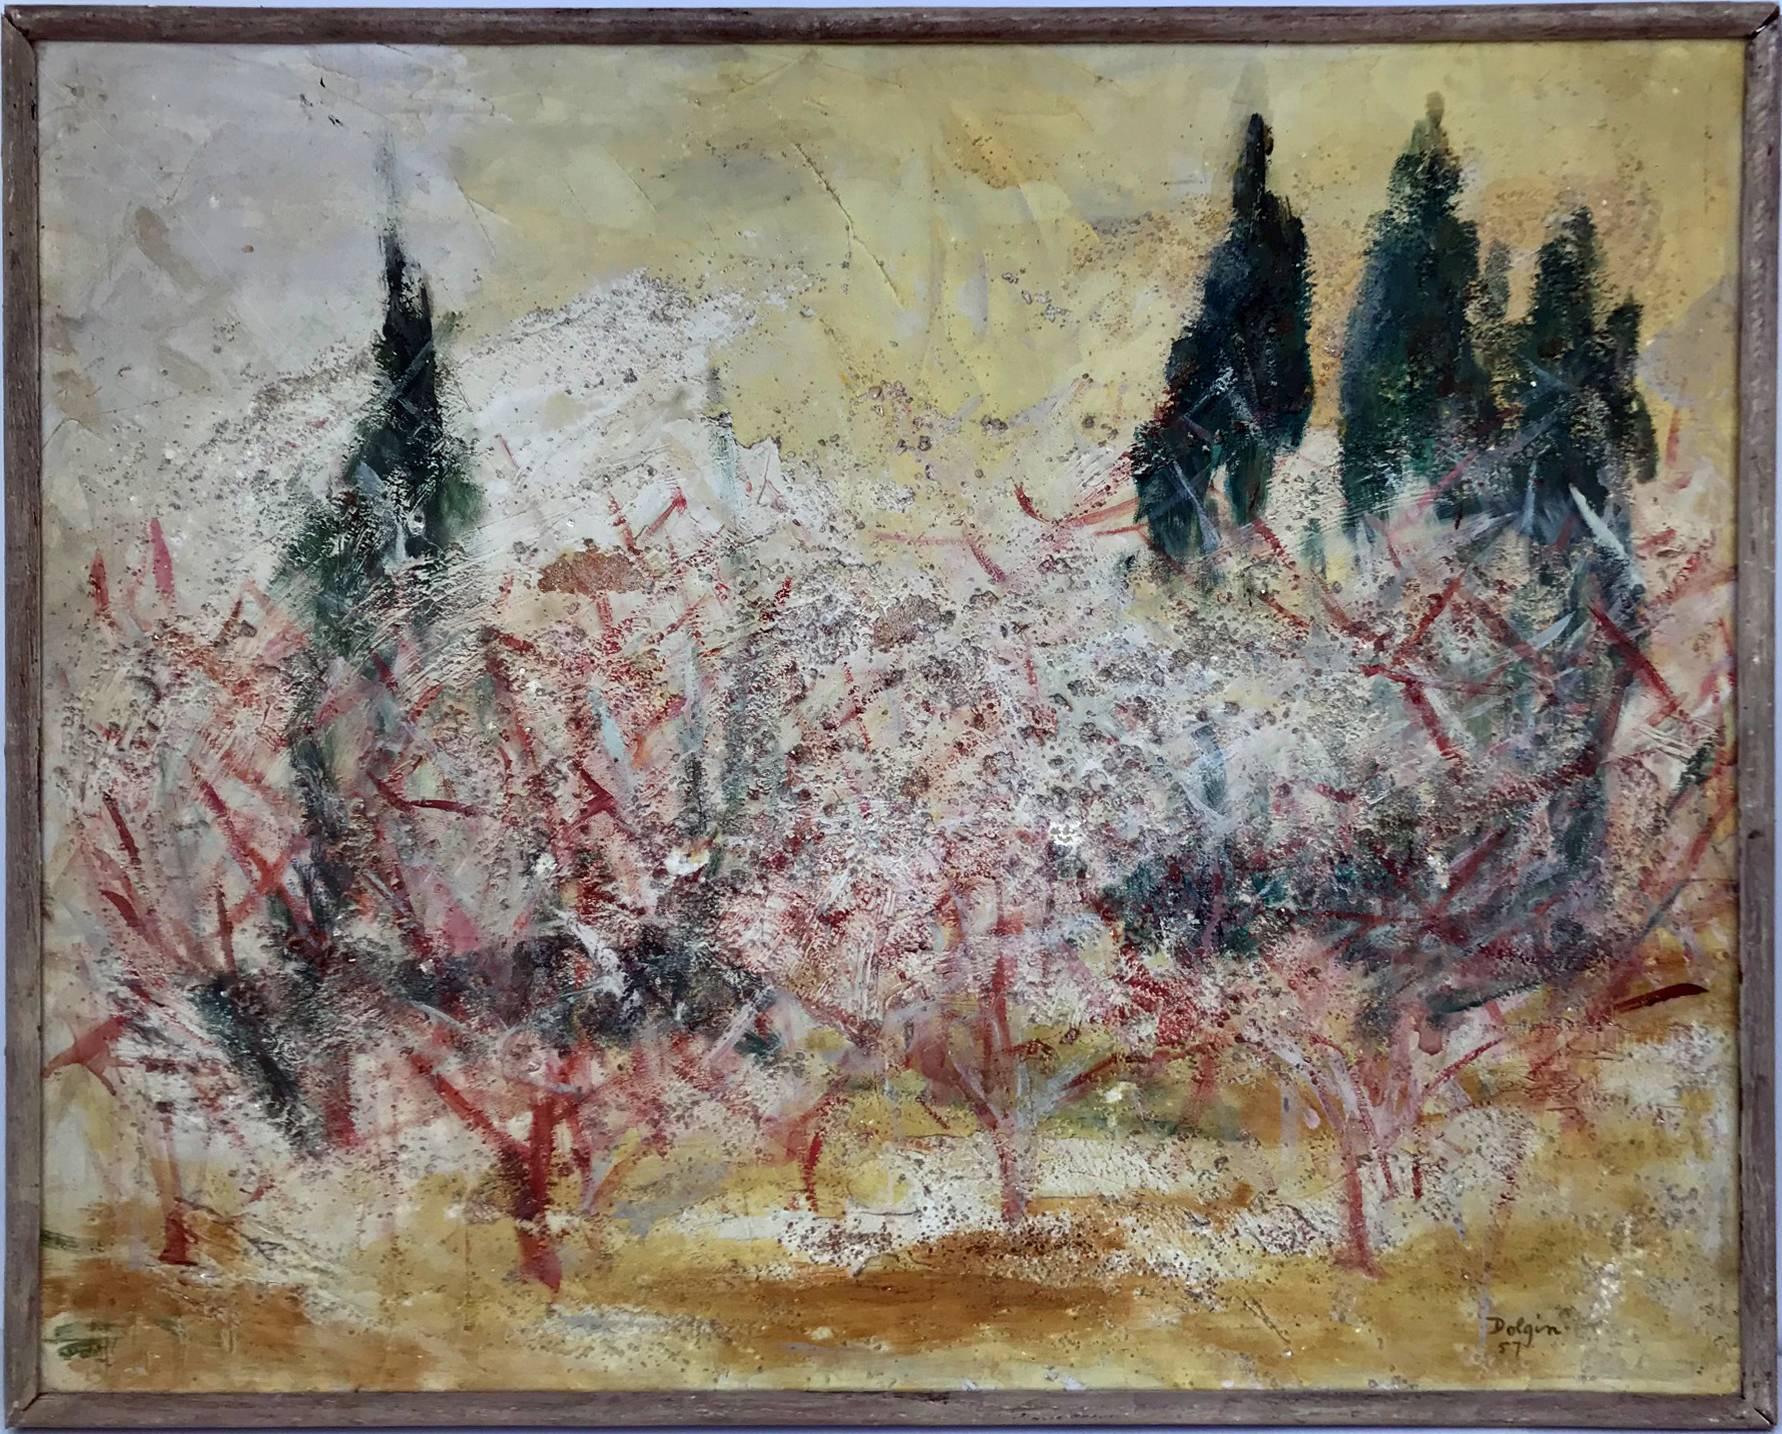 Untitled (Autumnal Landscape in Ochre, Red, Green)